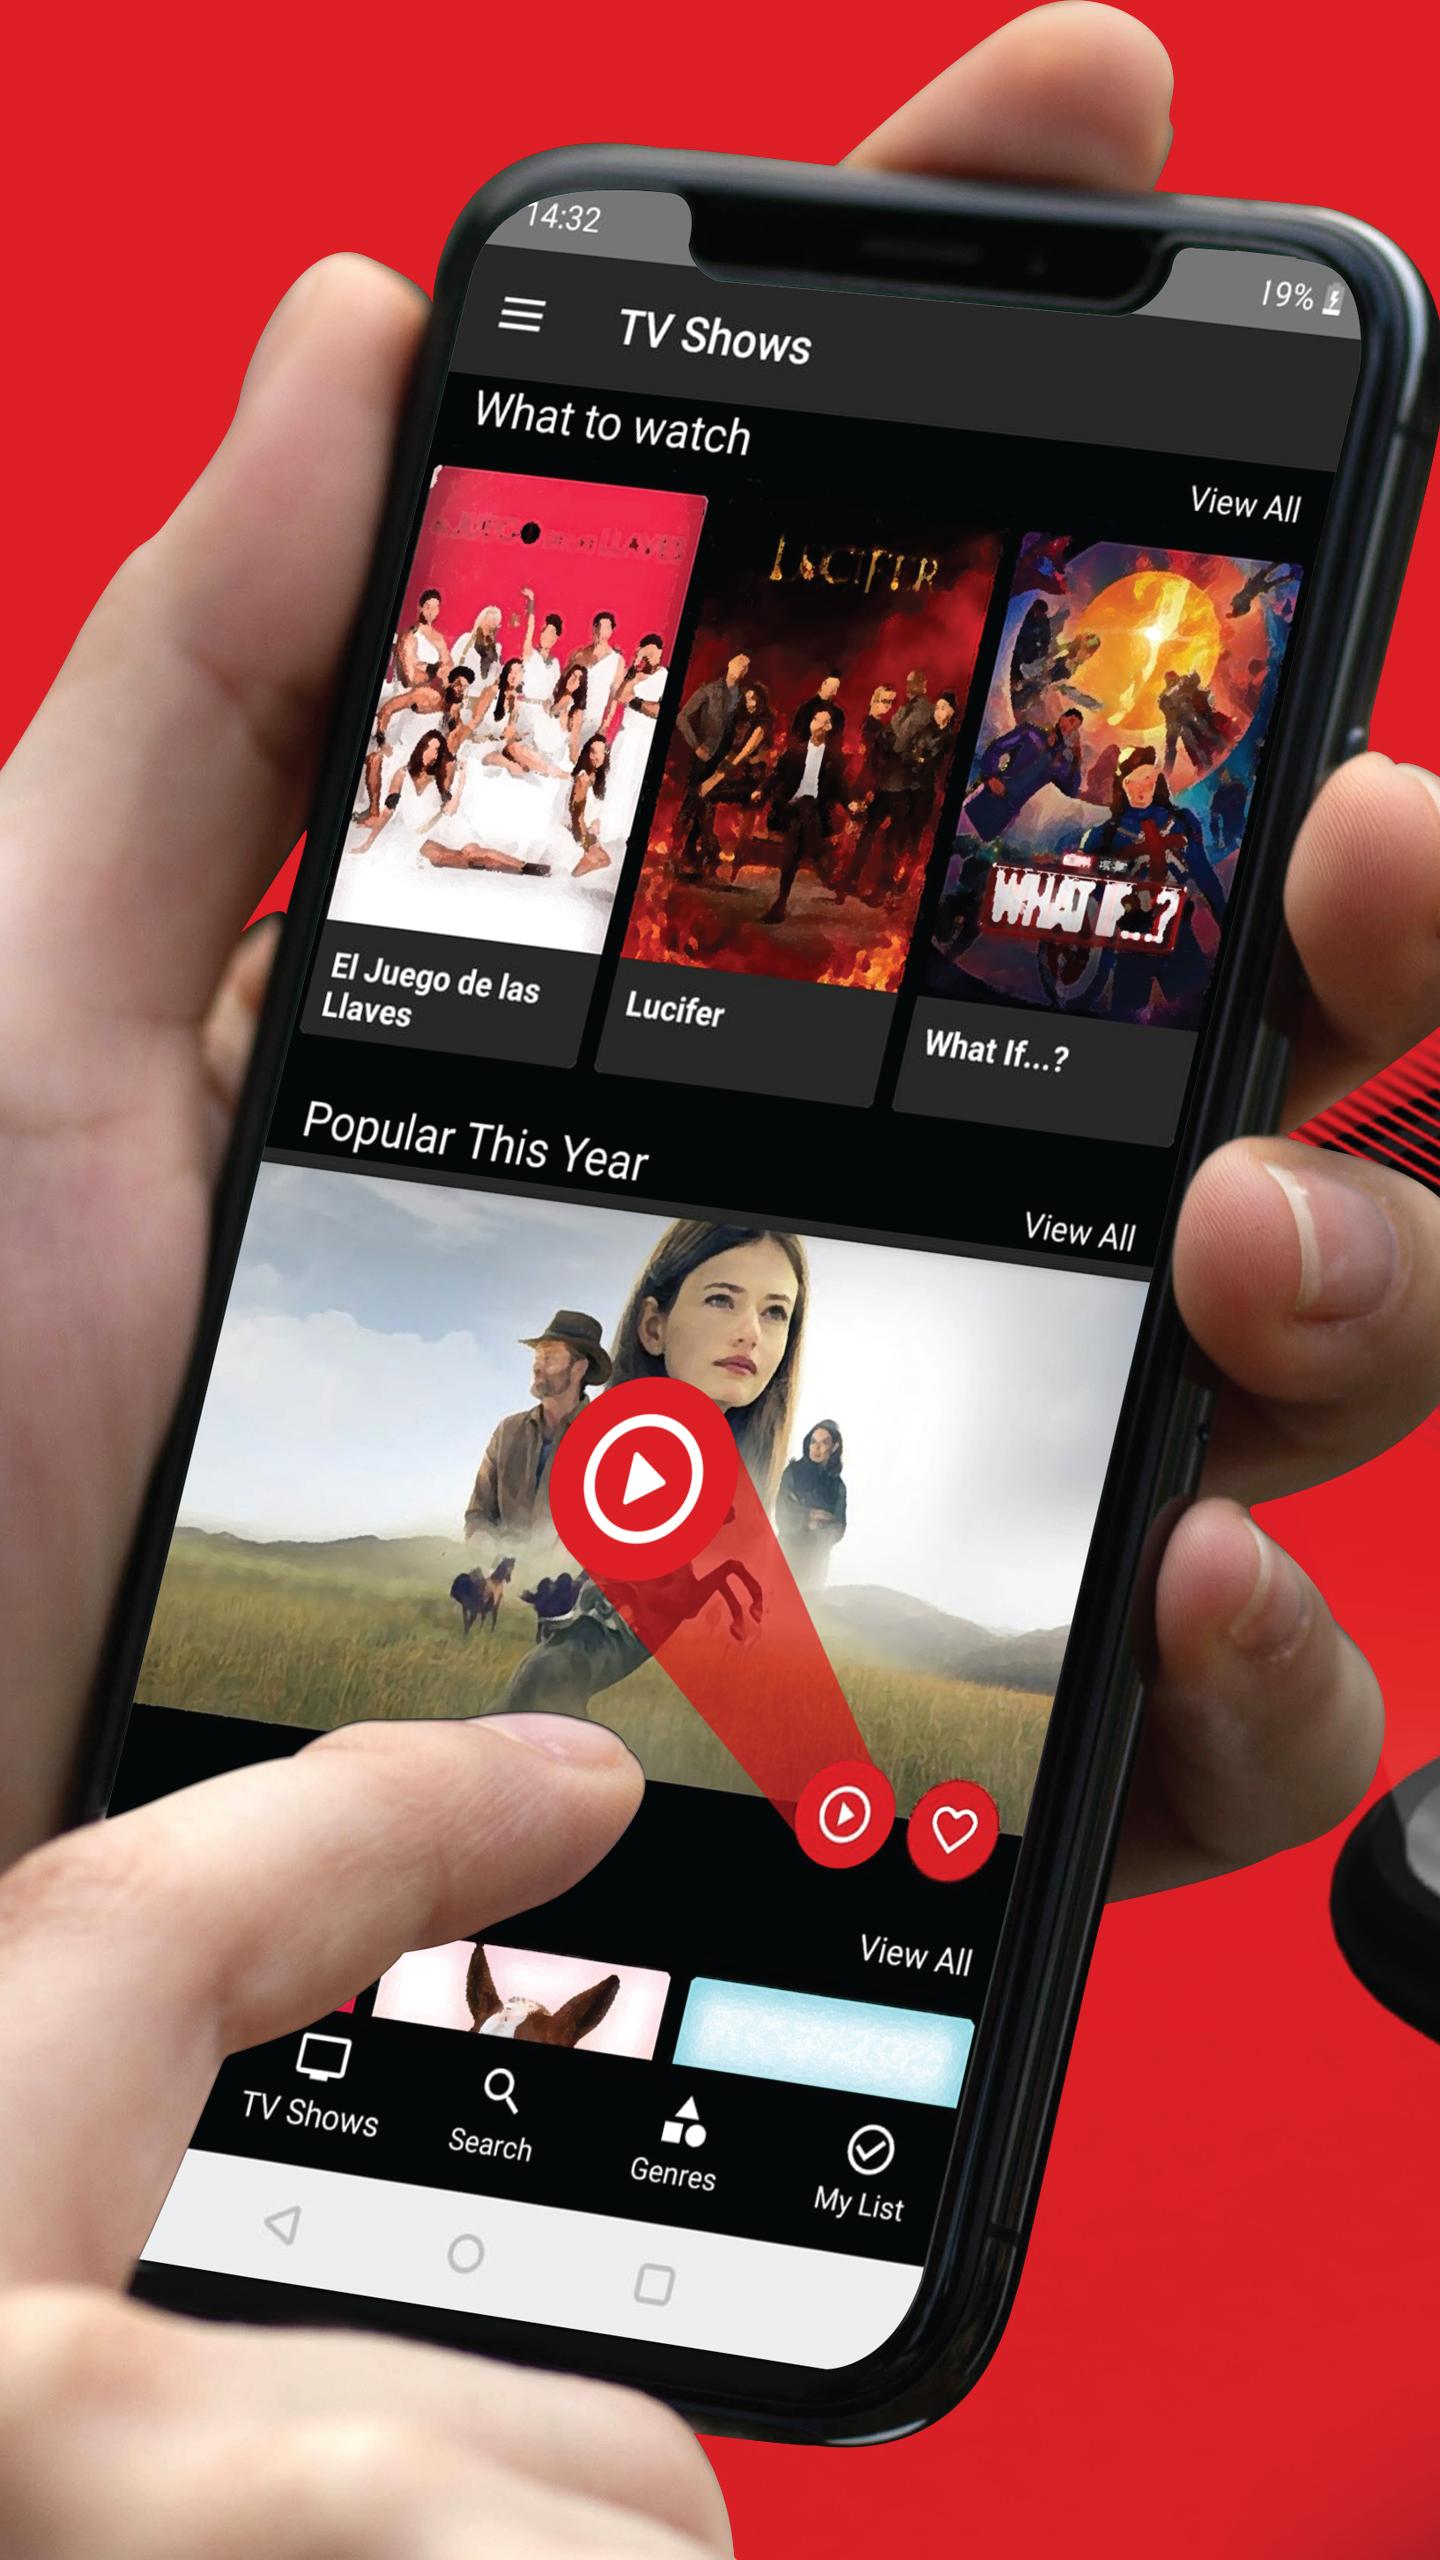 Moviesjoy plus. Android show. Moviesjoy. Android show movie. Video show APK poster.